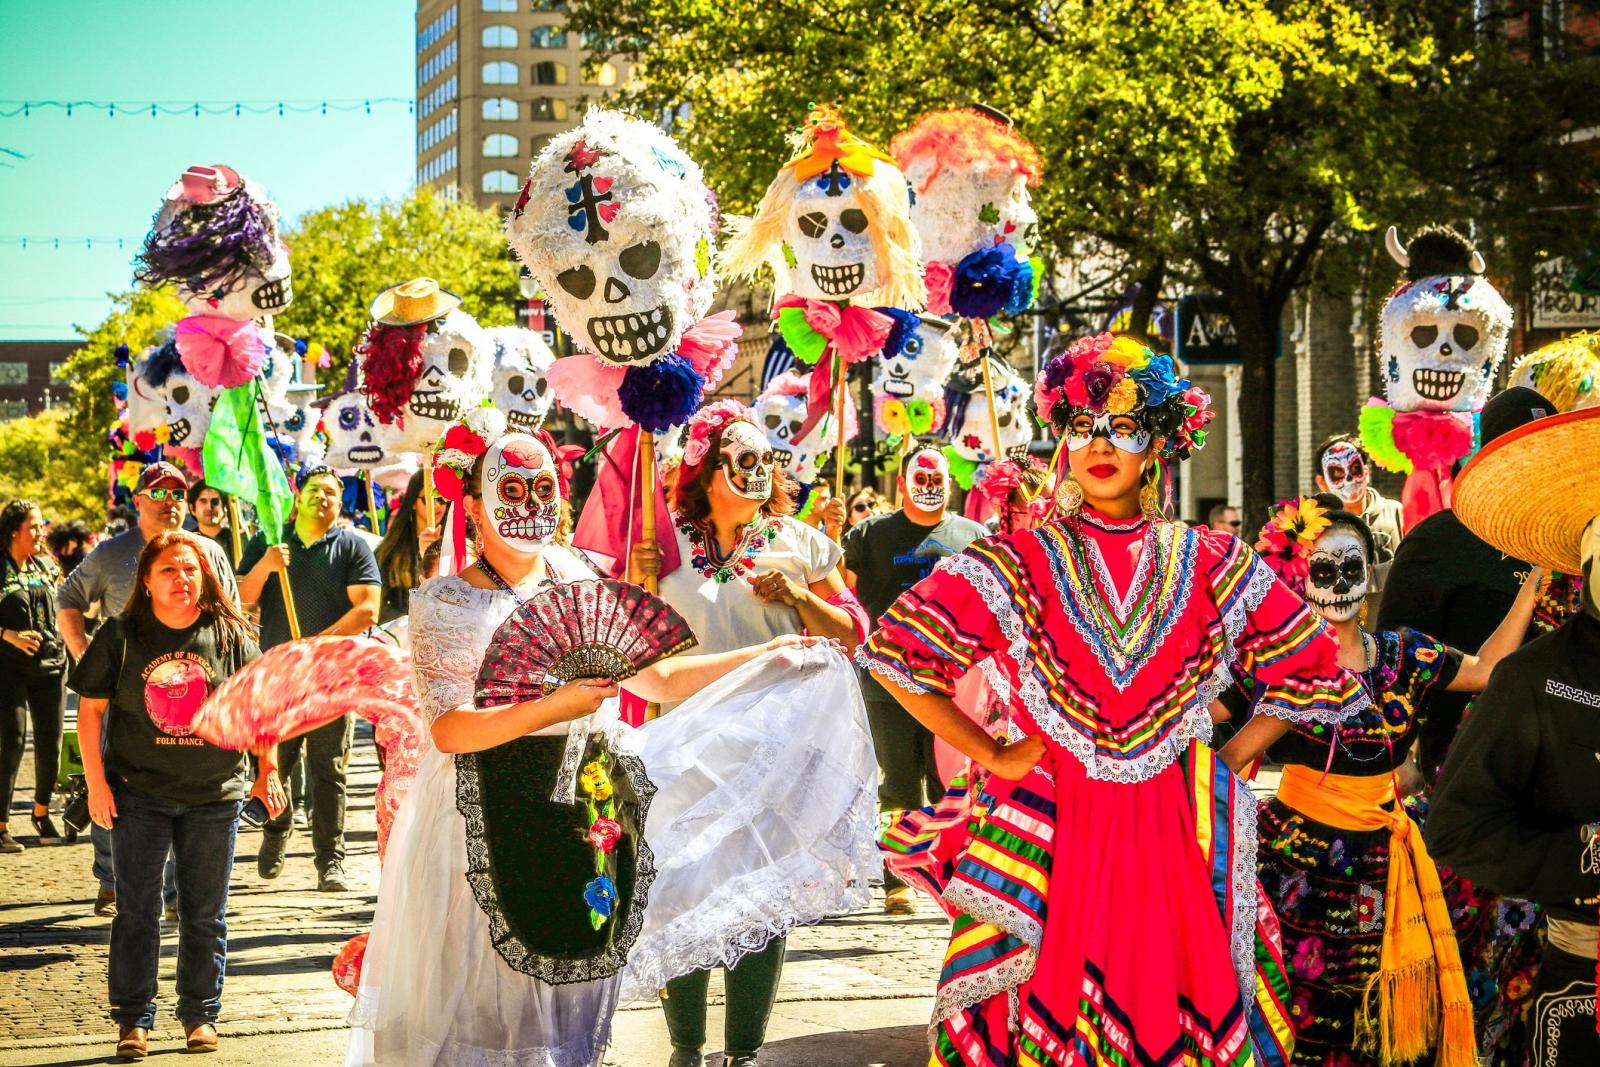 Cake Trivia Quiz Day Of The Dead Festival Parade In Mexic Arte Royalty Free Image 1598361216